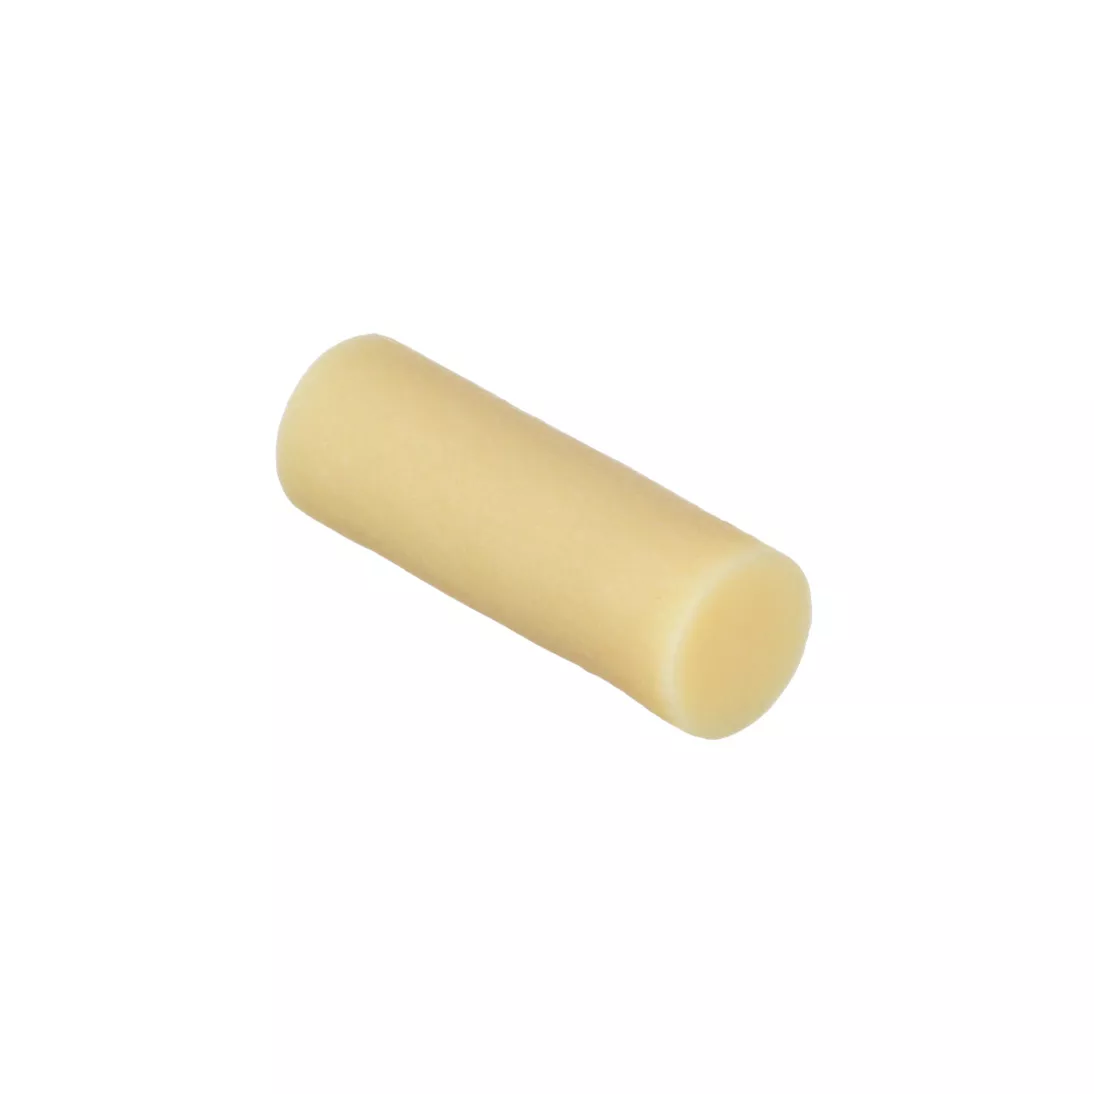 3M™ Hot Melt Adhesive 3731 PG, Tan, 1 in x 3 in, 22 lb/case